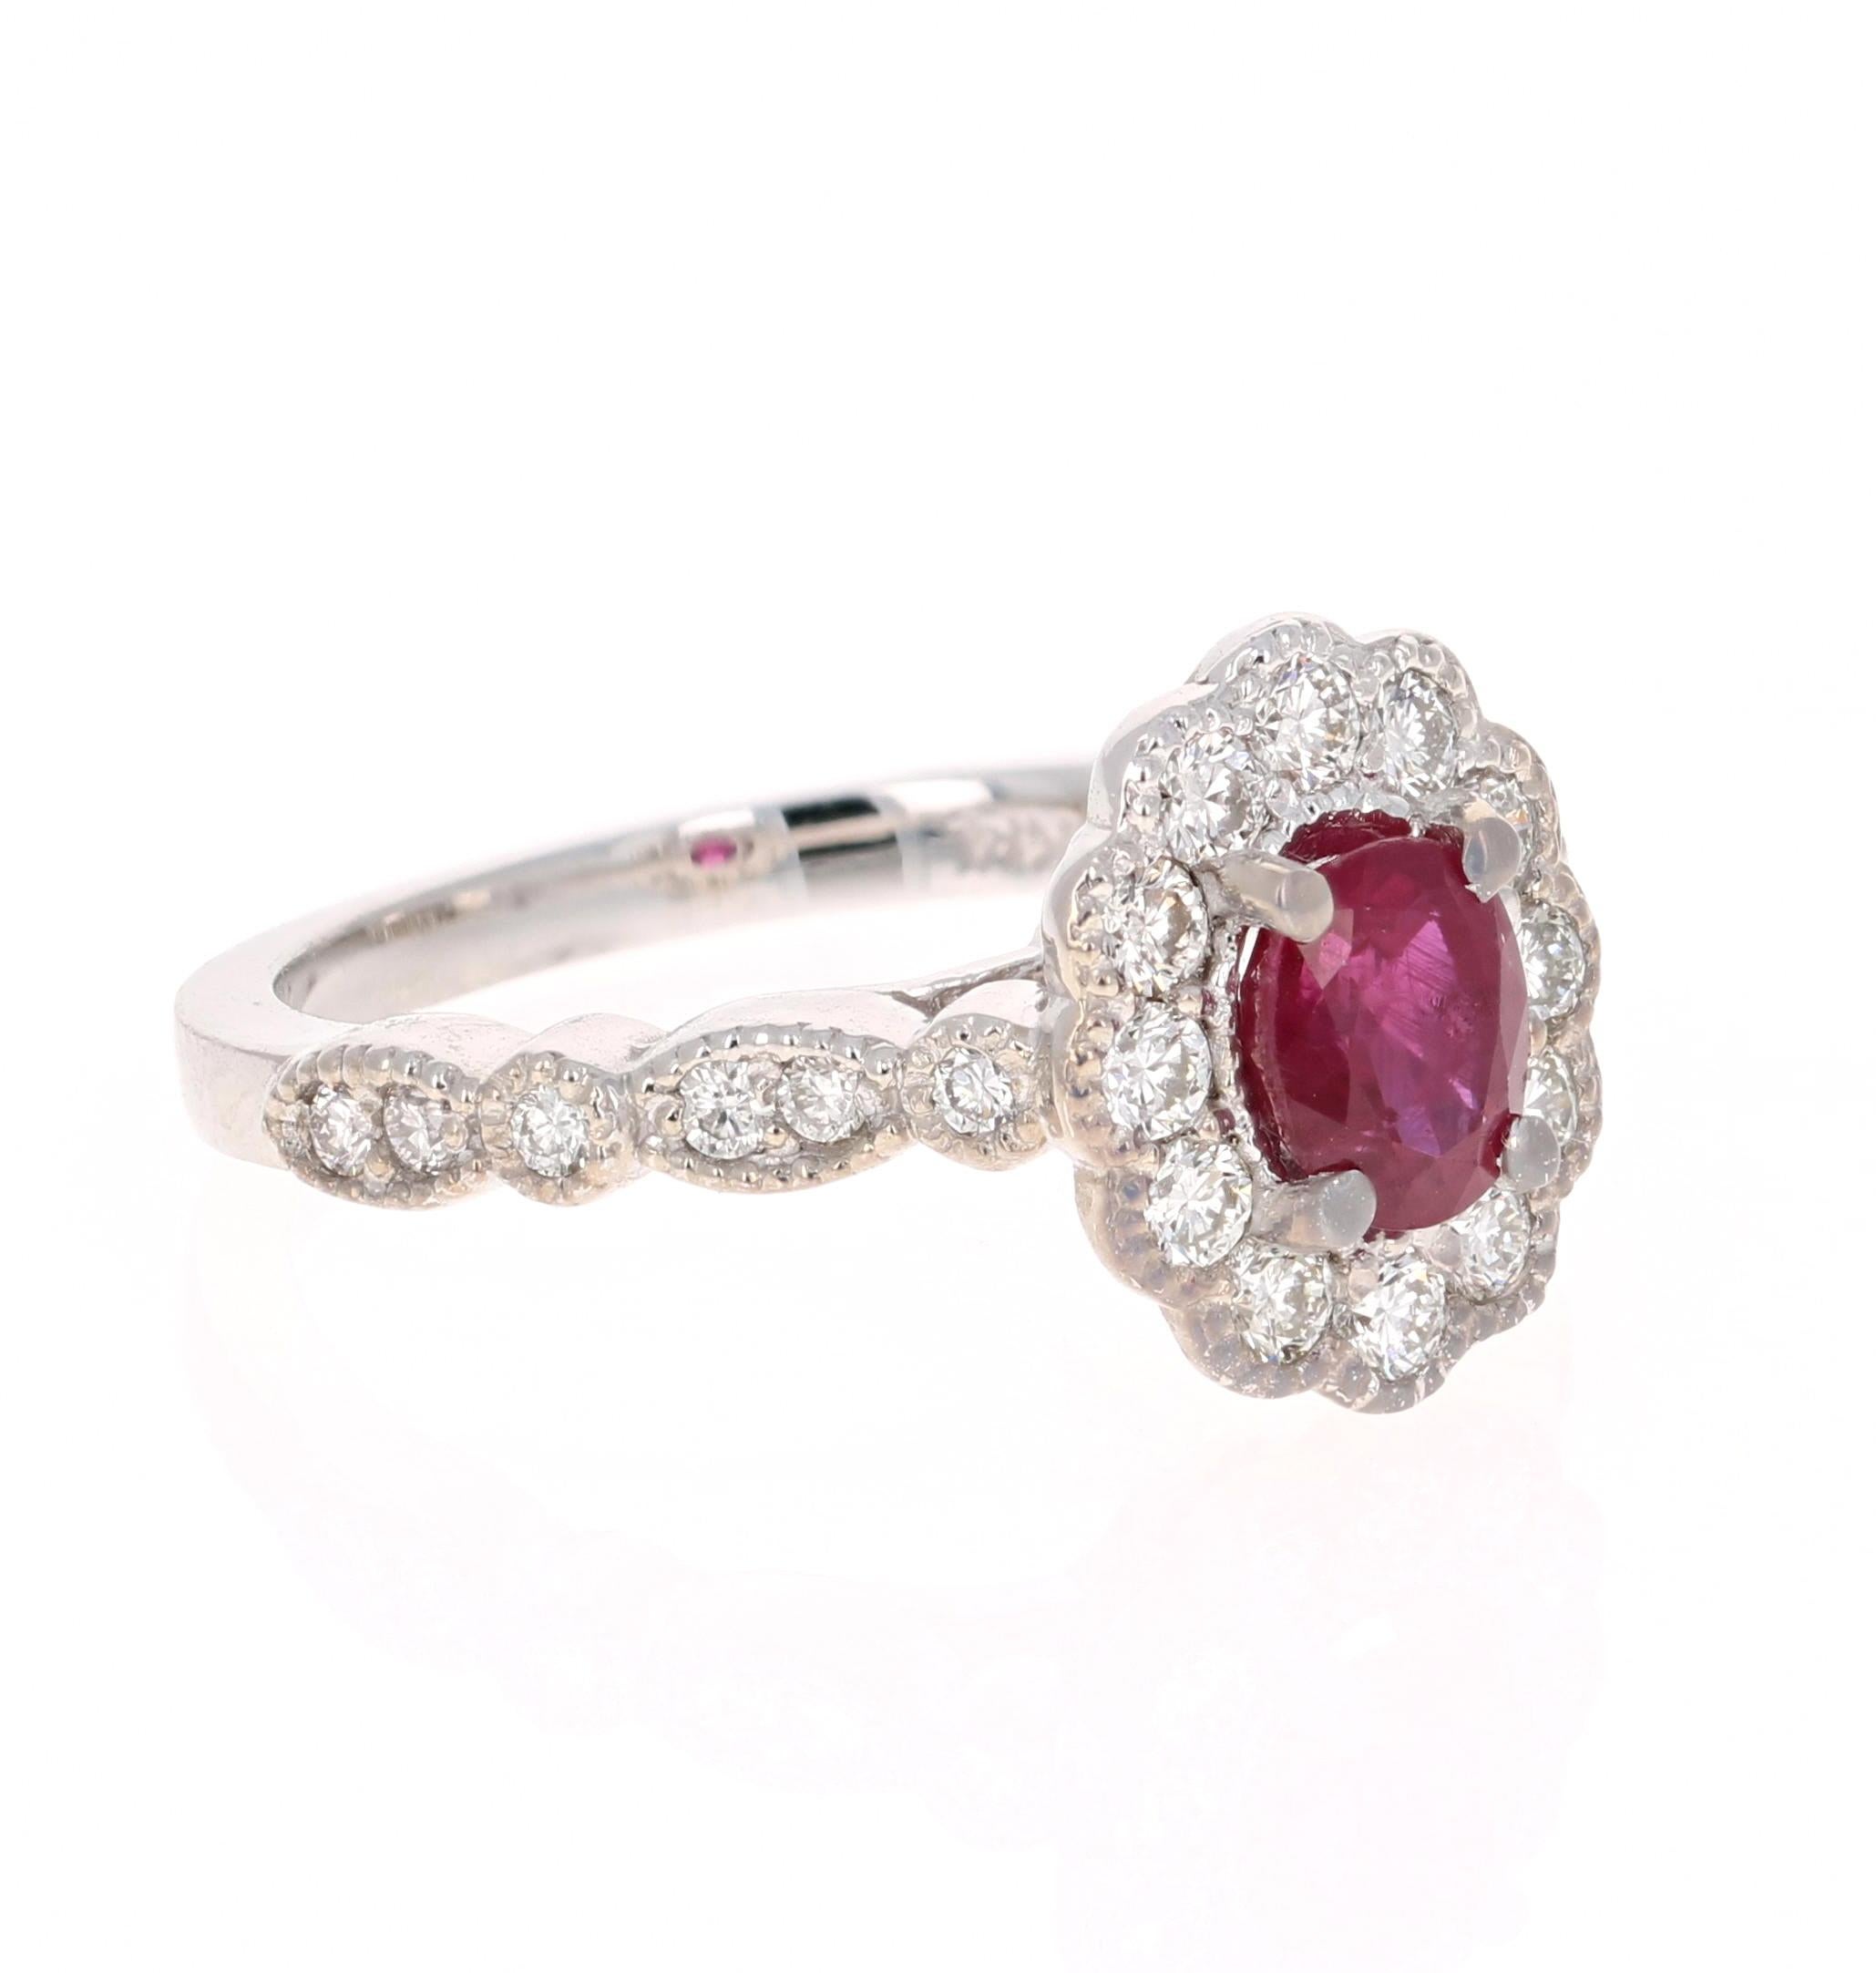 This ring has a 1.07 Carat Oval Cut Burmese Ruby that is set in the center and is surrounded by 24 Round Cut Diamonds that weigh 0.58 carats.   The Clarity and Color of the Diamonds is VS2-H.  The total carat weight of the ring is 1.65 carats.

The